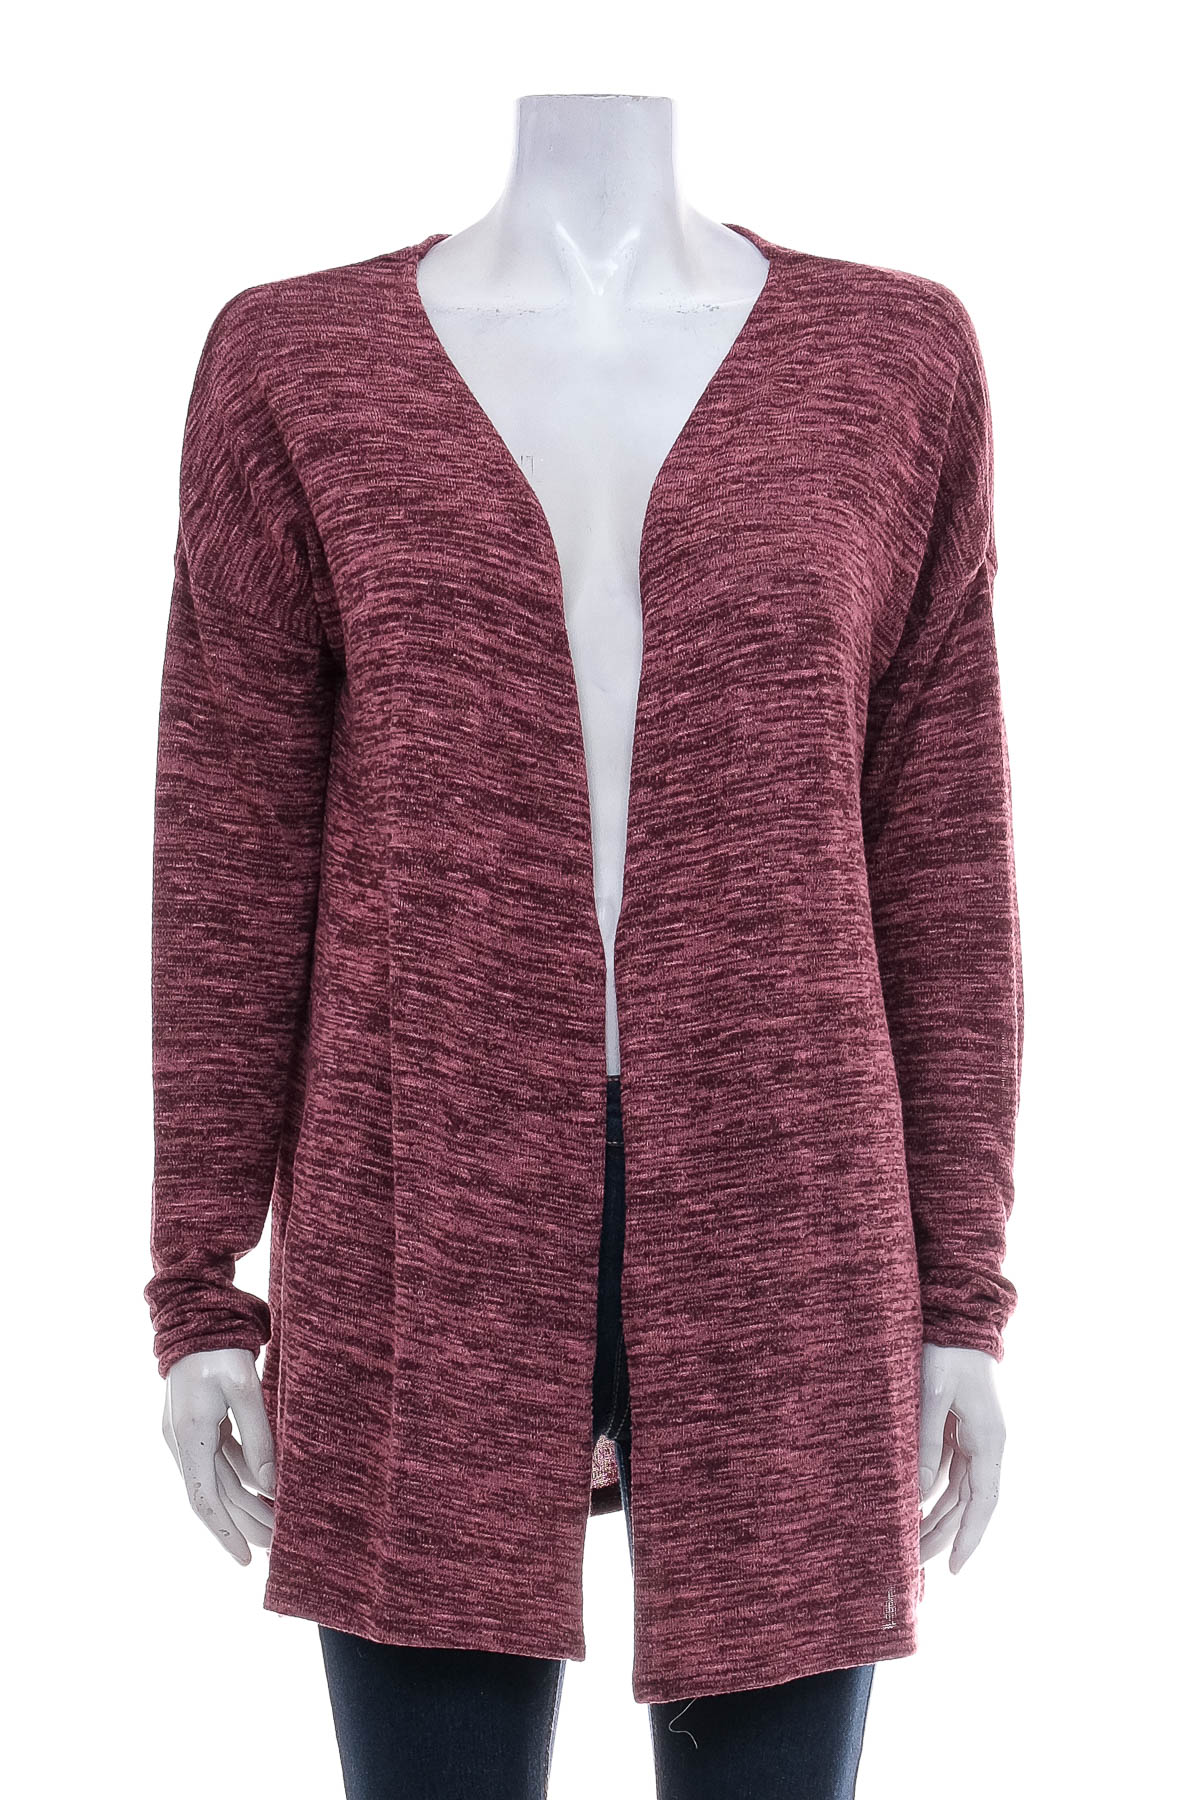 Women's cardigan - Colours of the world - 0